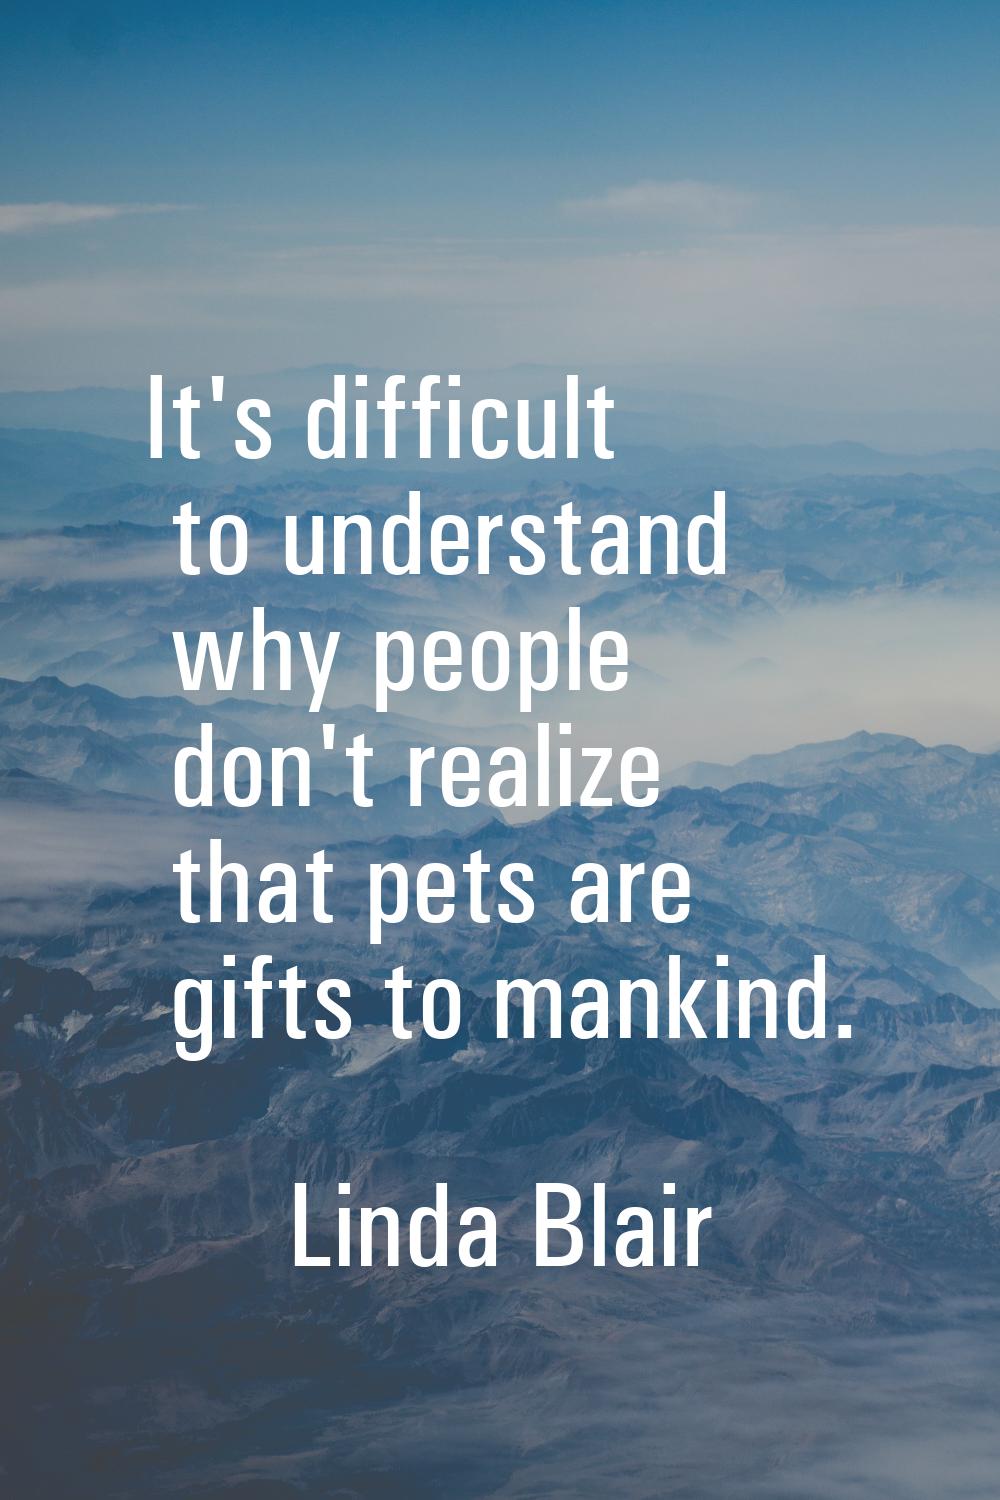 It's difficult to understand why people don't realize that pets are gifts to mankind.